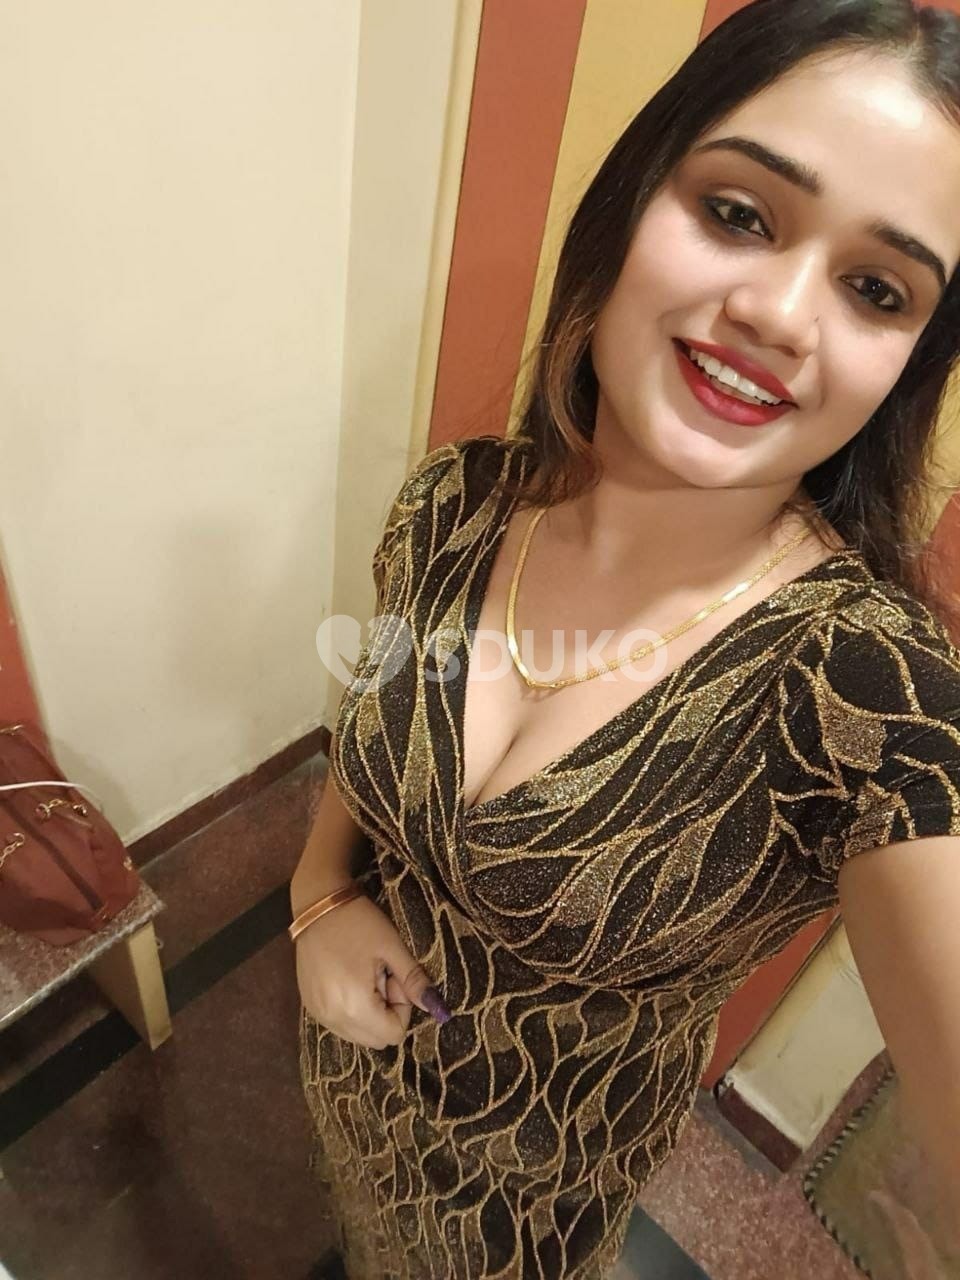 Bardhaman ❣️❣️Low price high profile college girl and aunty available any time available service genuine vip cal